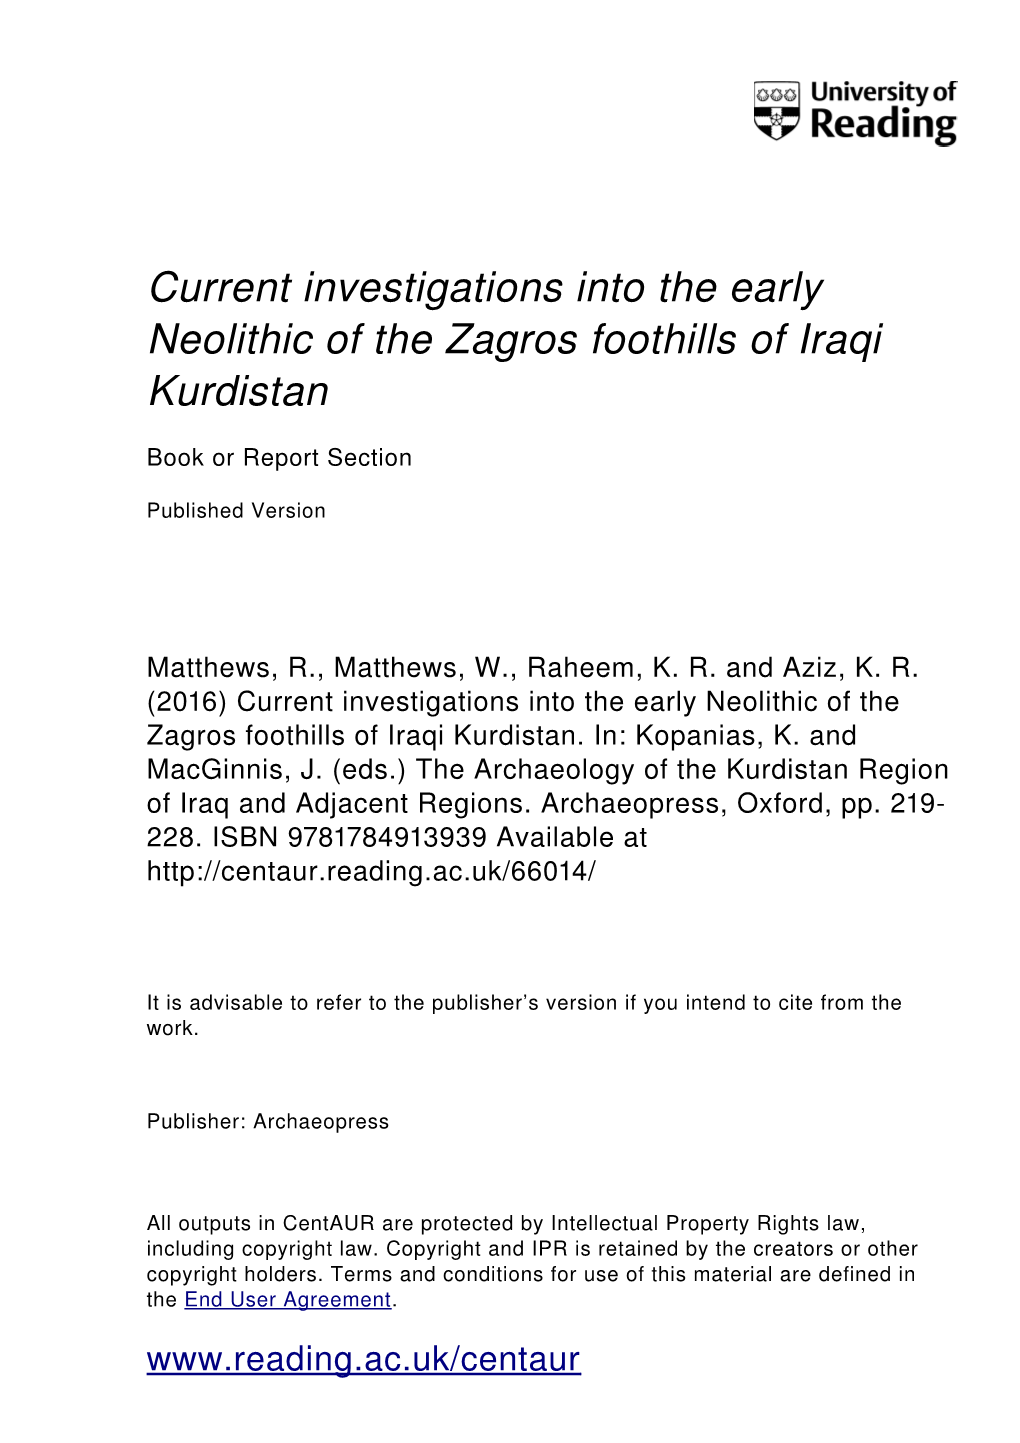 Current Investigations Into the Early Neolithic of the Zagros Foothills of Iraqi Kurdistan